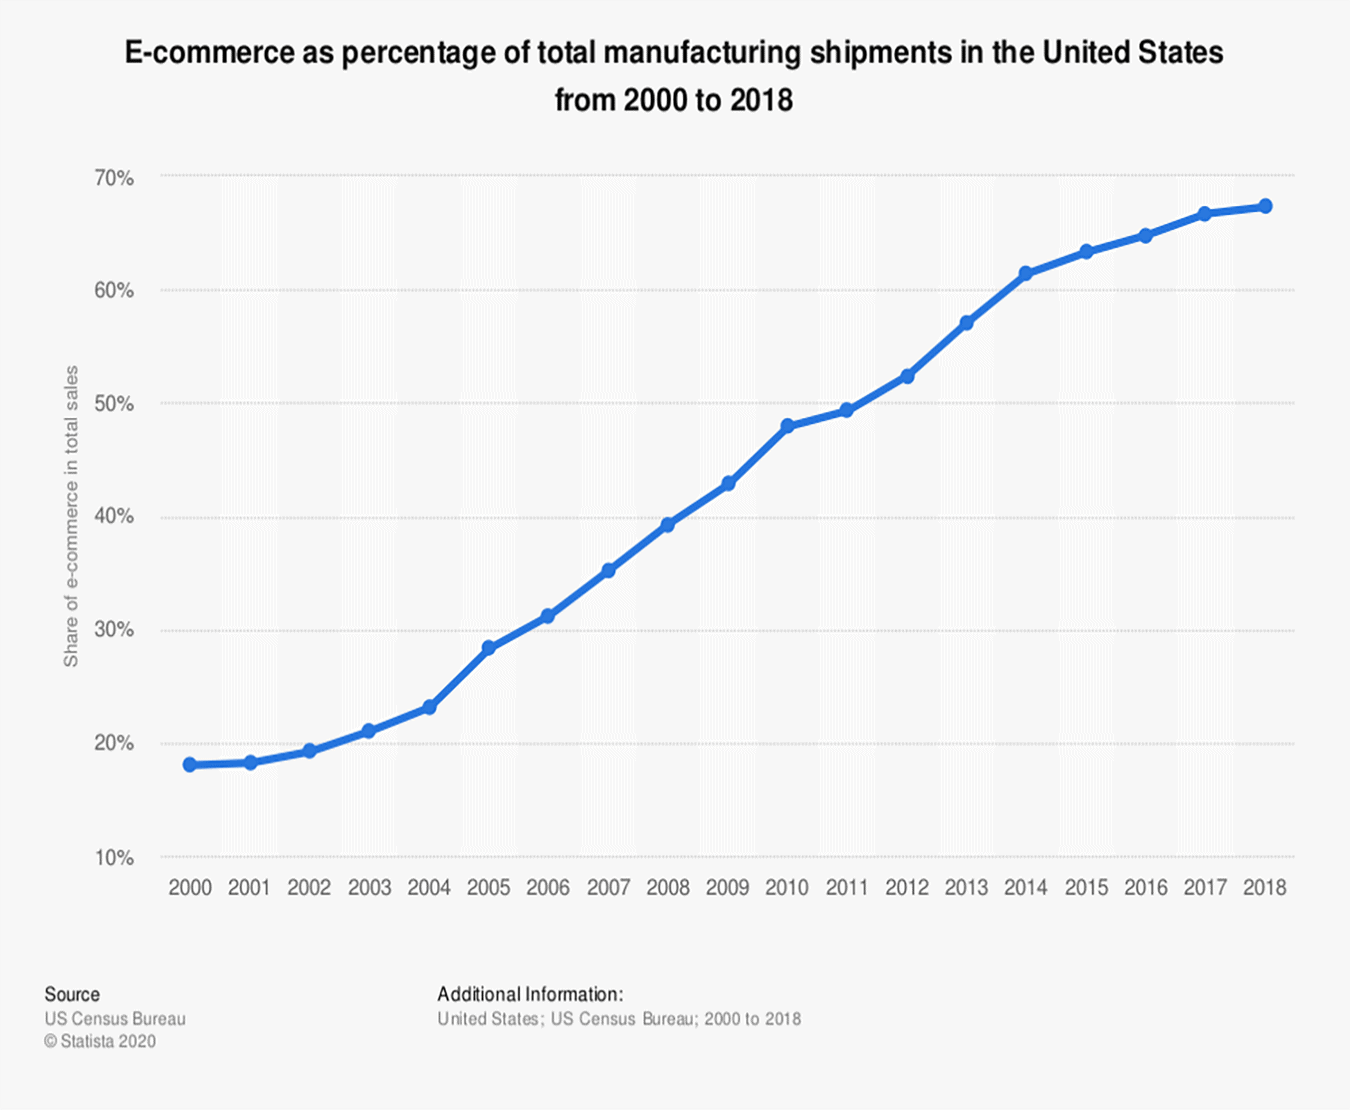 e-commerce in manufacturing businesses grew to 67.3% of sales in 2018